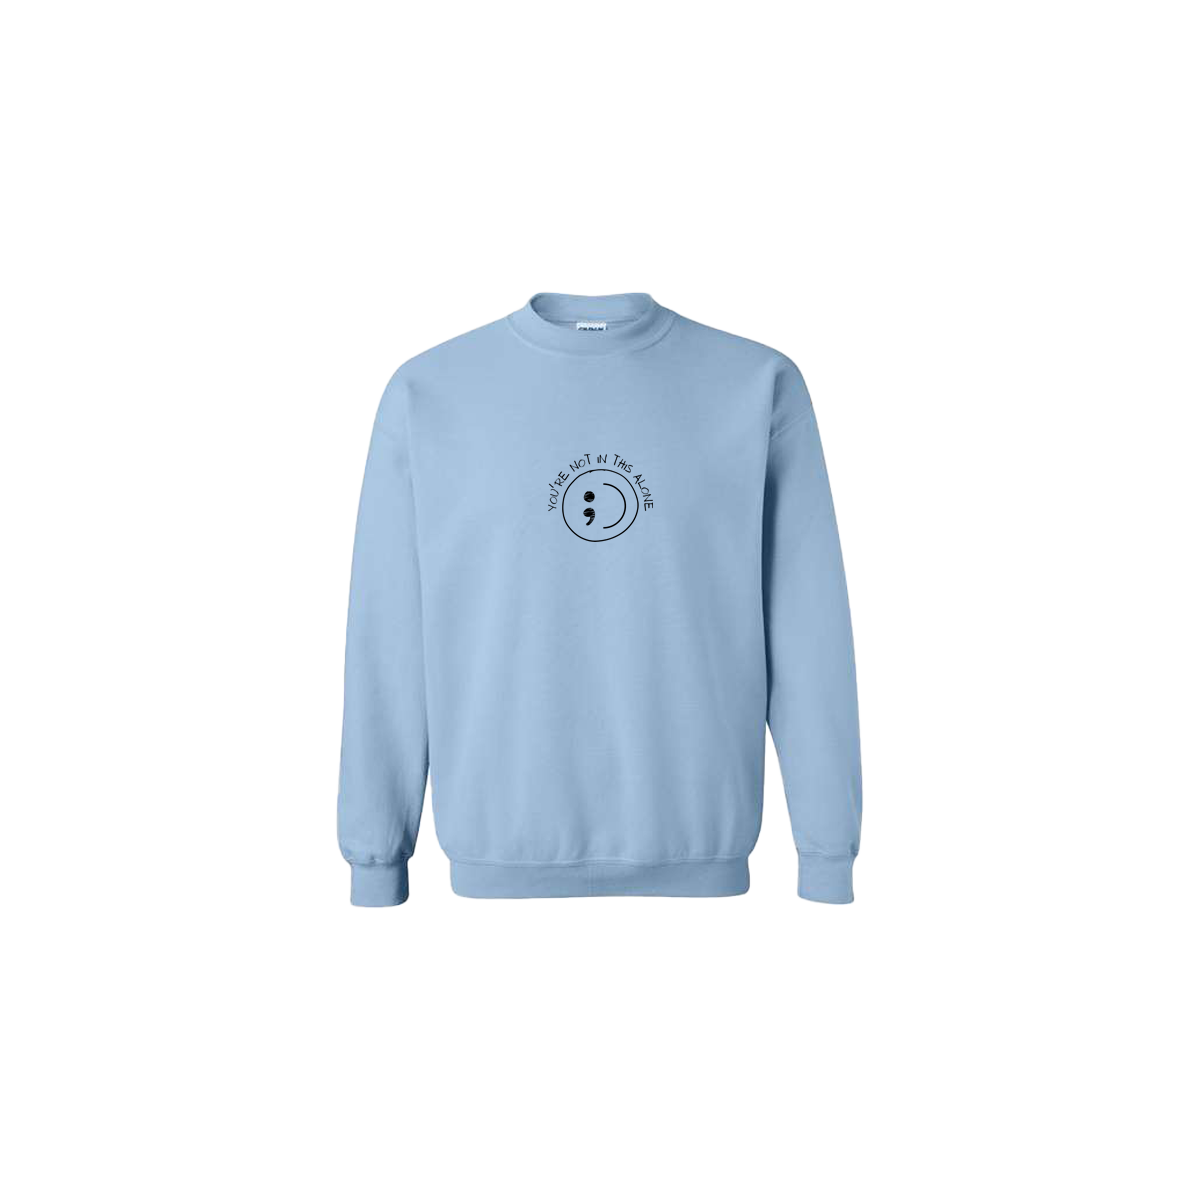 You're Not In This Alone Embroidered Light Blue Crewneck - Mental Health Awareness Clothing